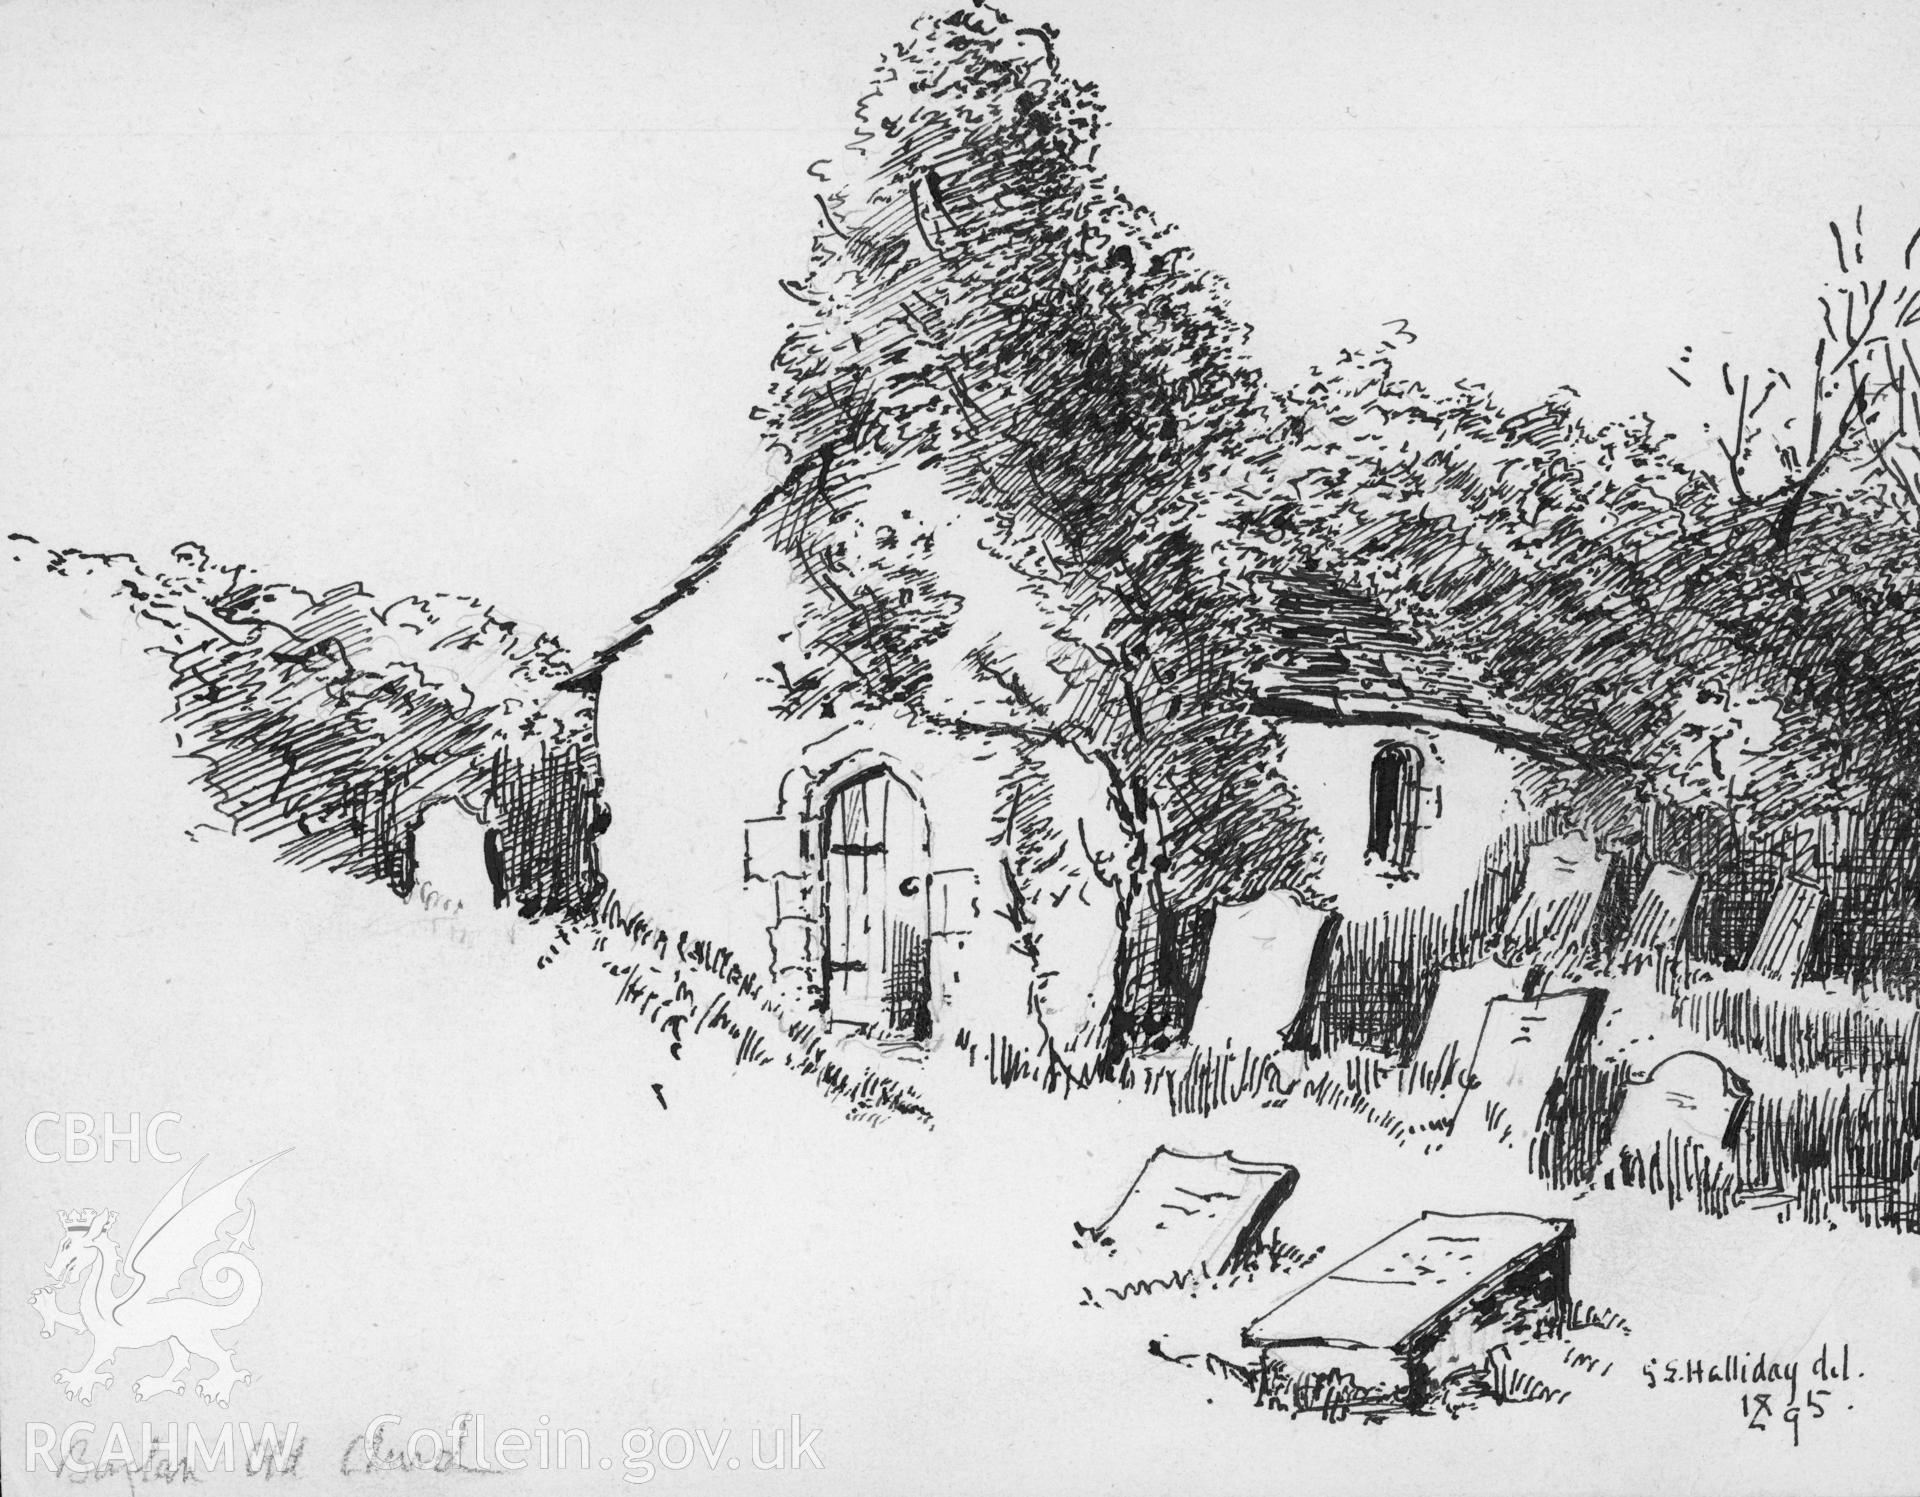 Digital copy of an ink drawing of Baglan Old Church produced by G.E. Halliday, 1895.